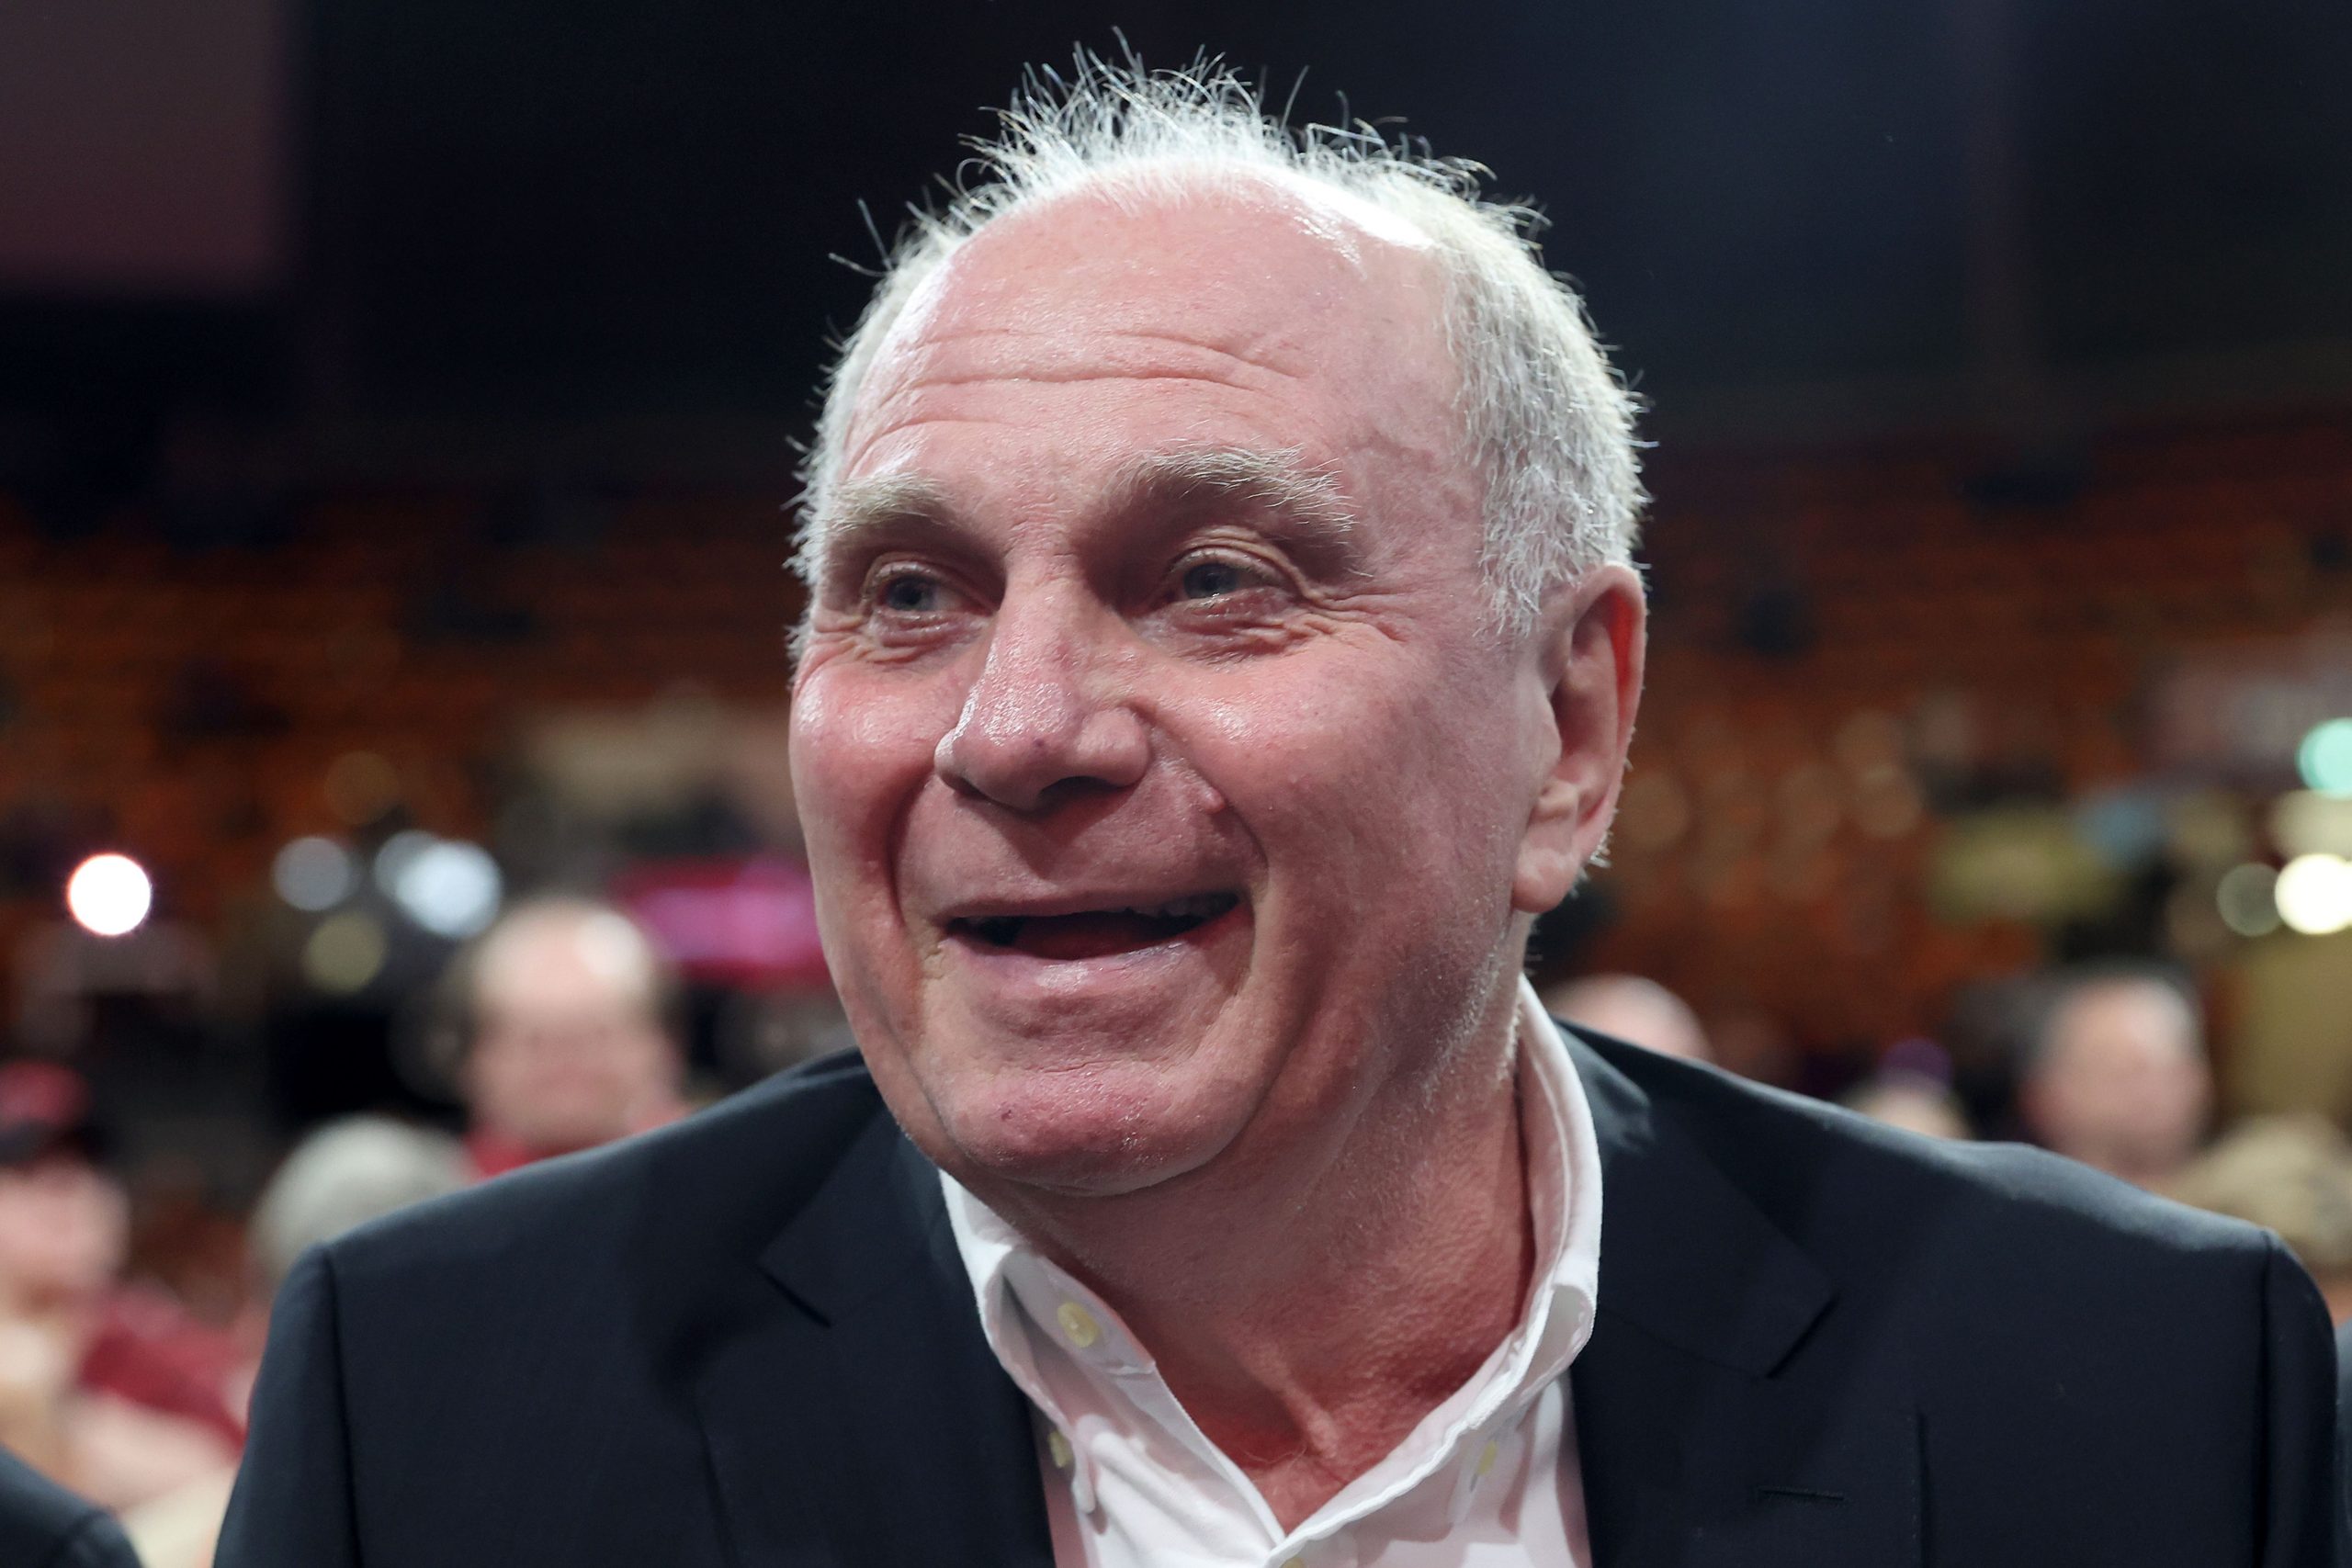 Uli Hoeness is the honorary President of FC Bayern München.